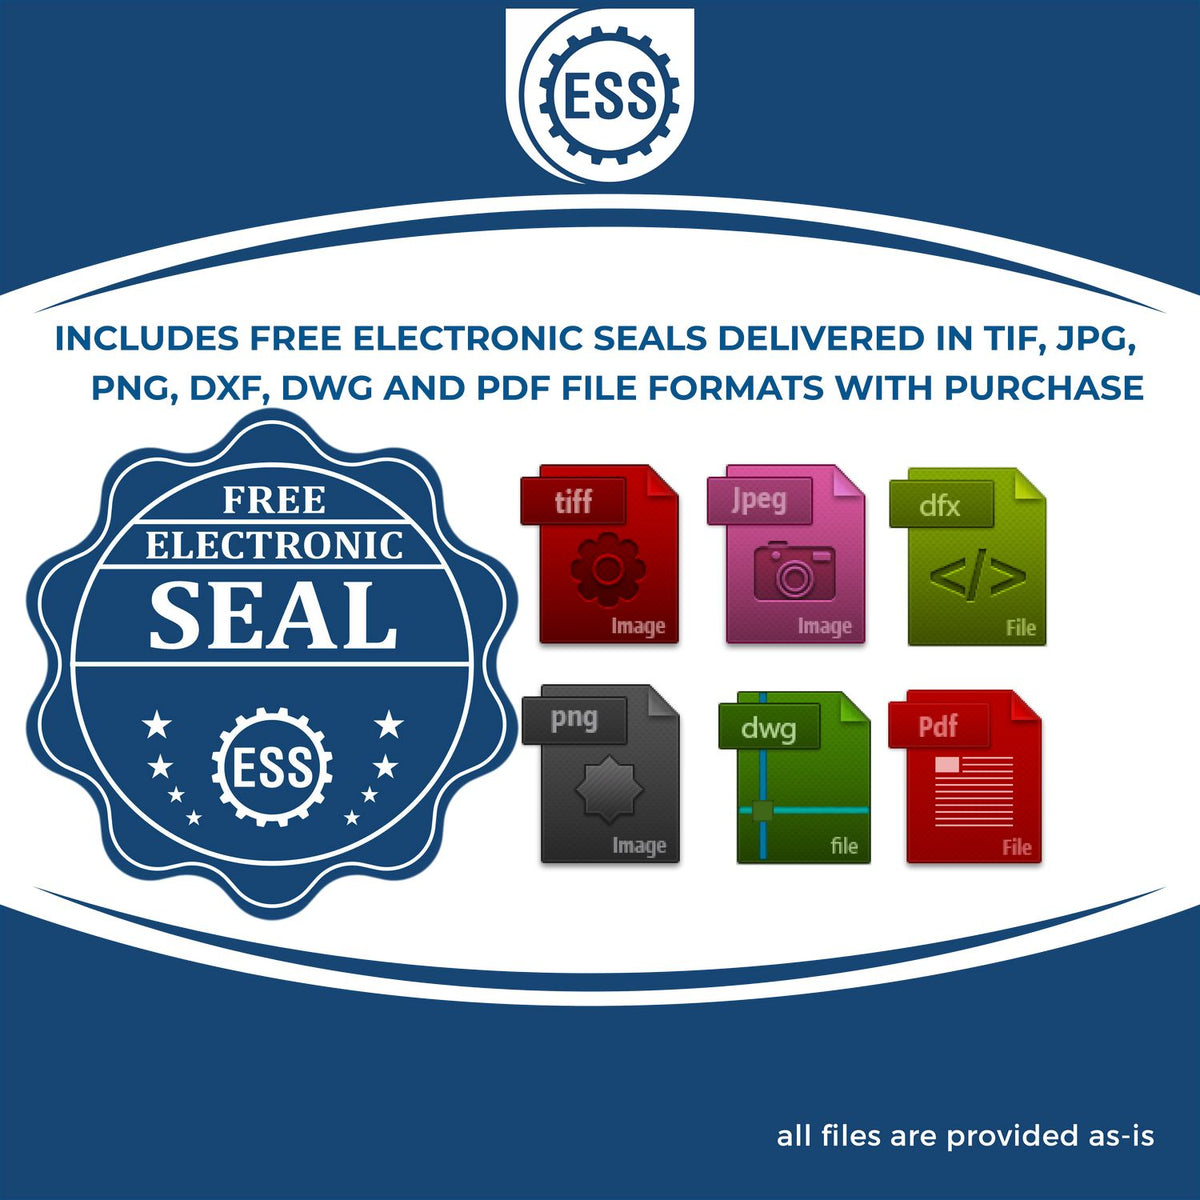 An infographic for the free electronic seal for the Premium MaxLight Pre-Inked Rhode Island Engineering Stamp illustrating the different file type icons such as DXF, DWG, TIF, JPG and PNG.